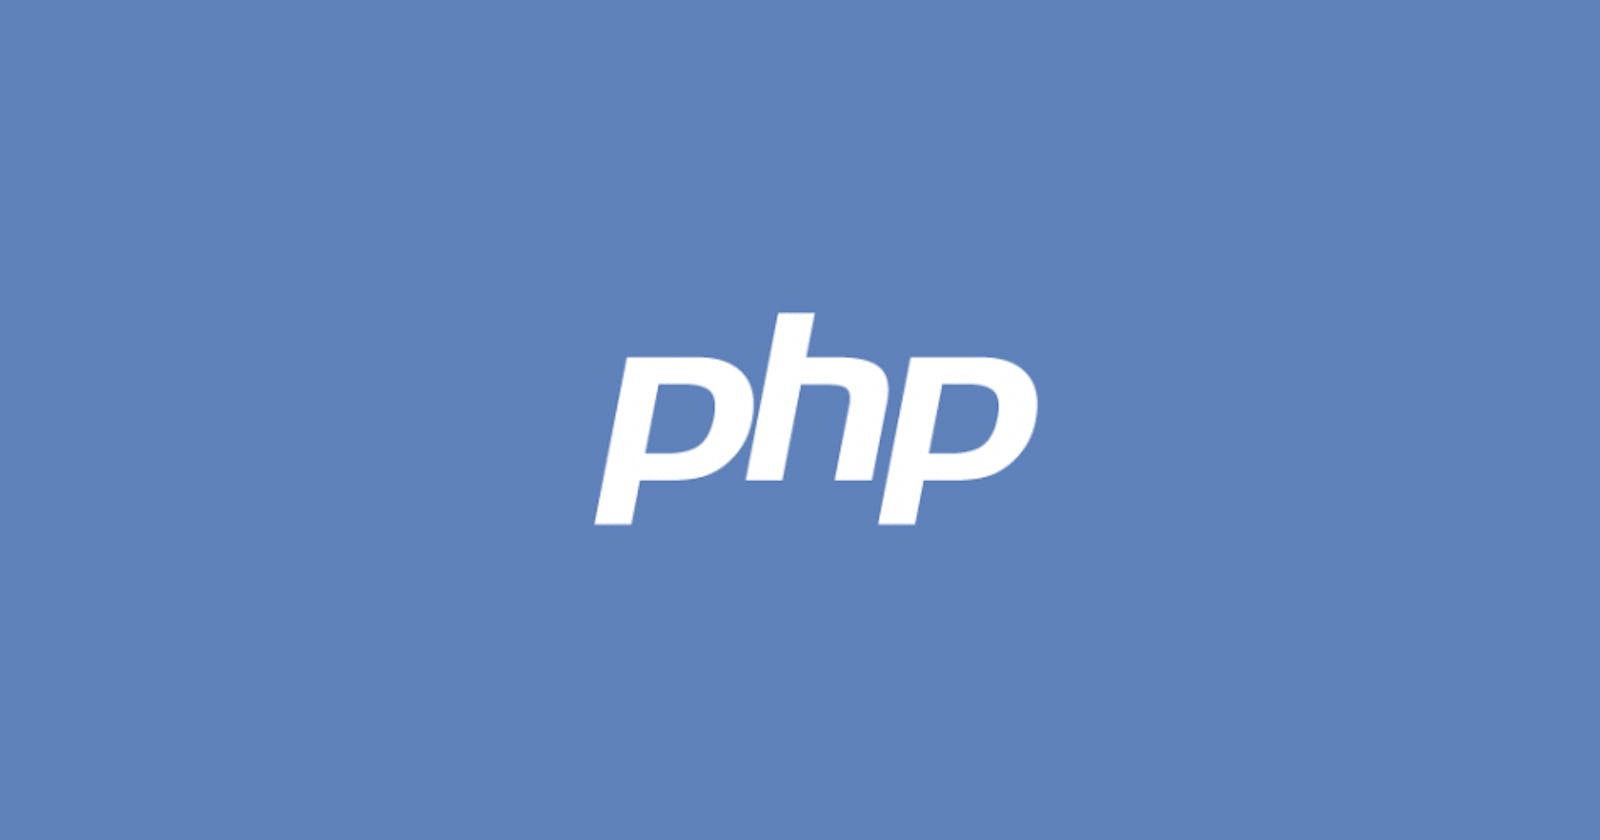 Options for adding a blog to a PHP app